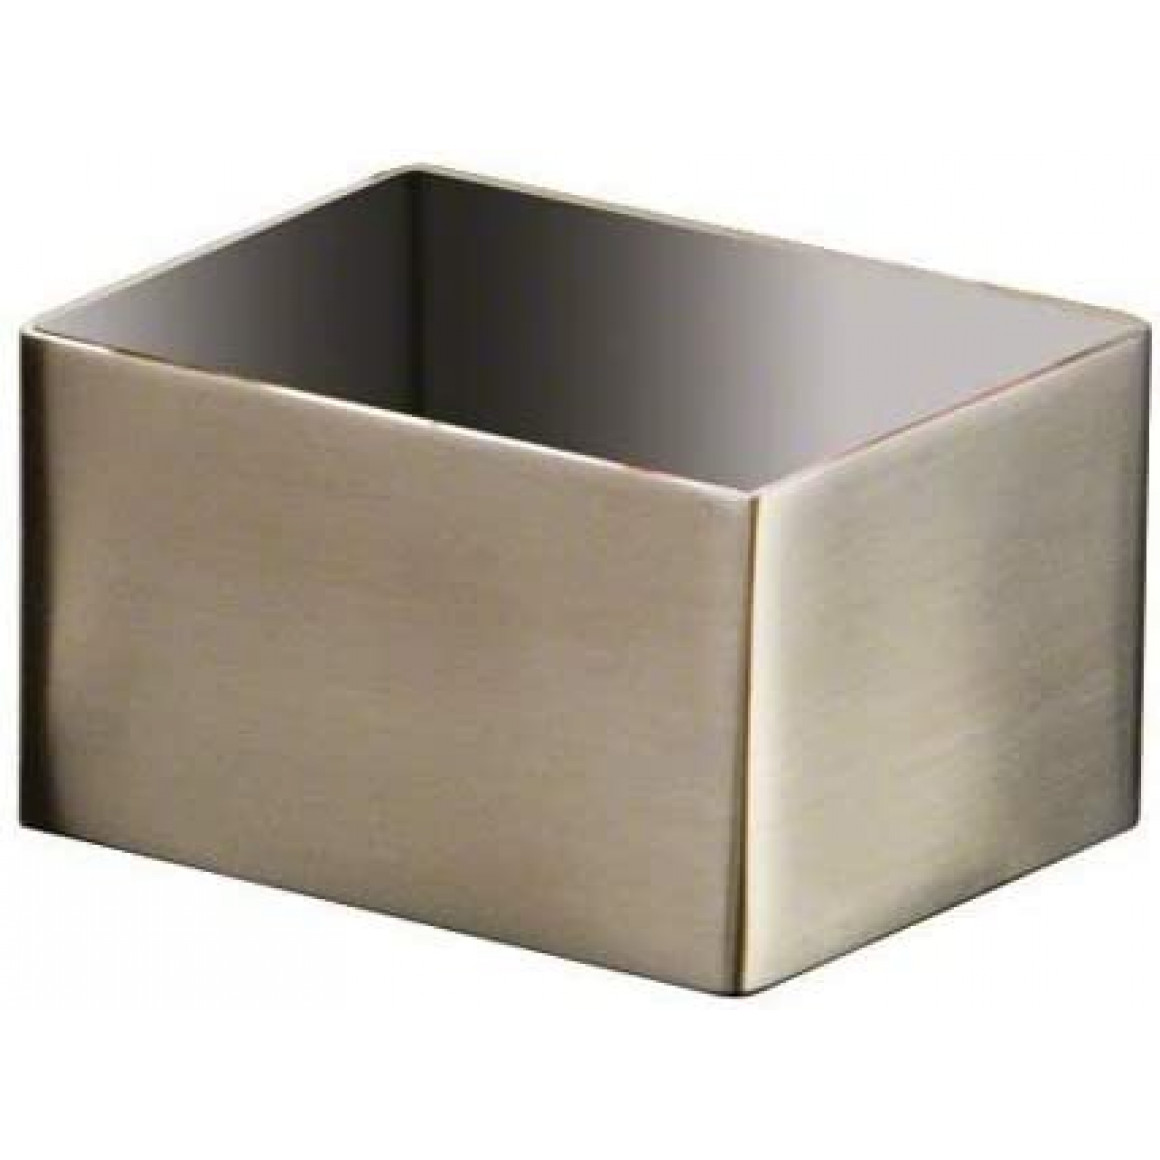 HOLDER, SUGAR PACKET/CUBE, STAINLESS STEEL, SATIN, RECTANGLE